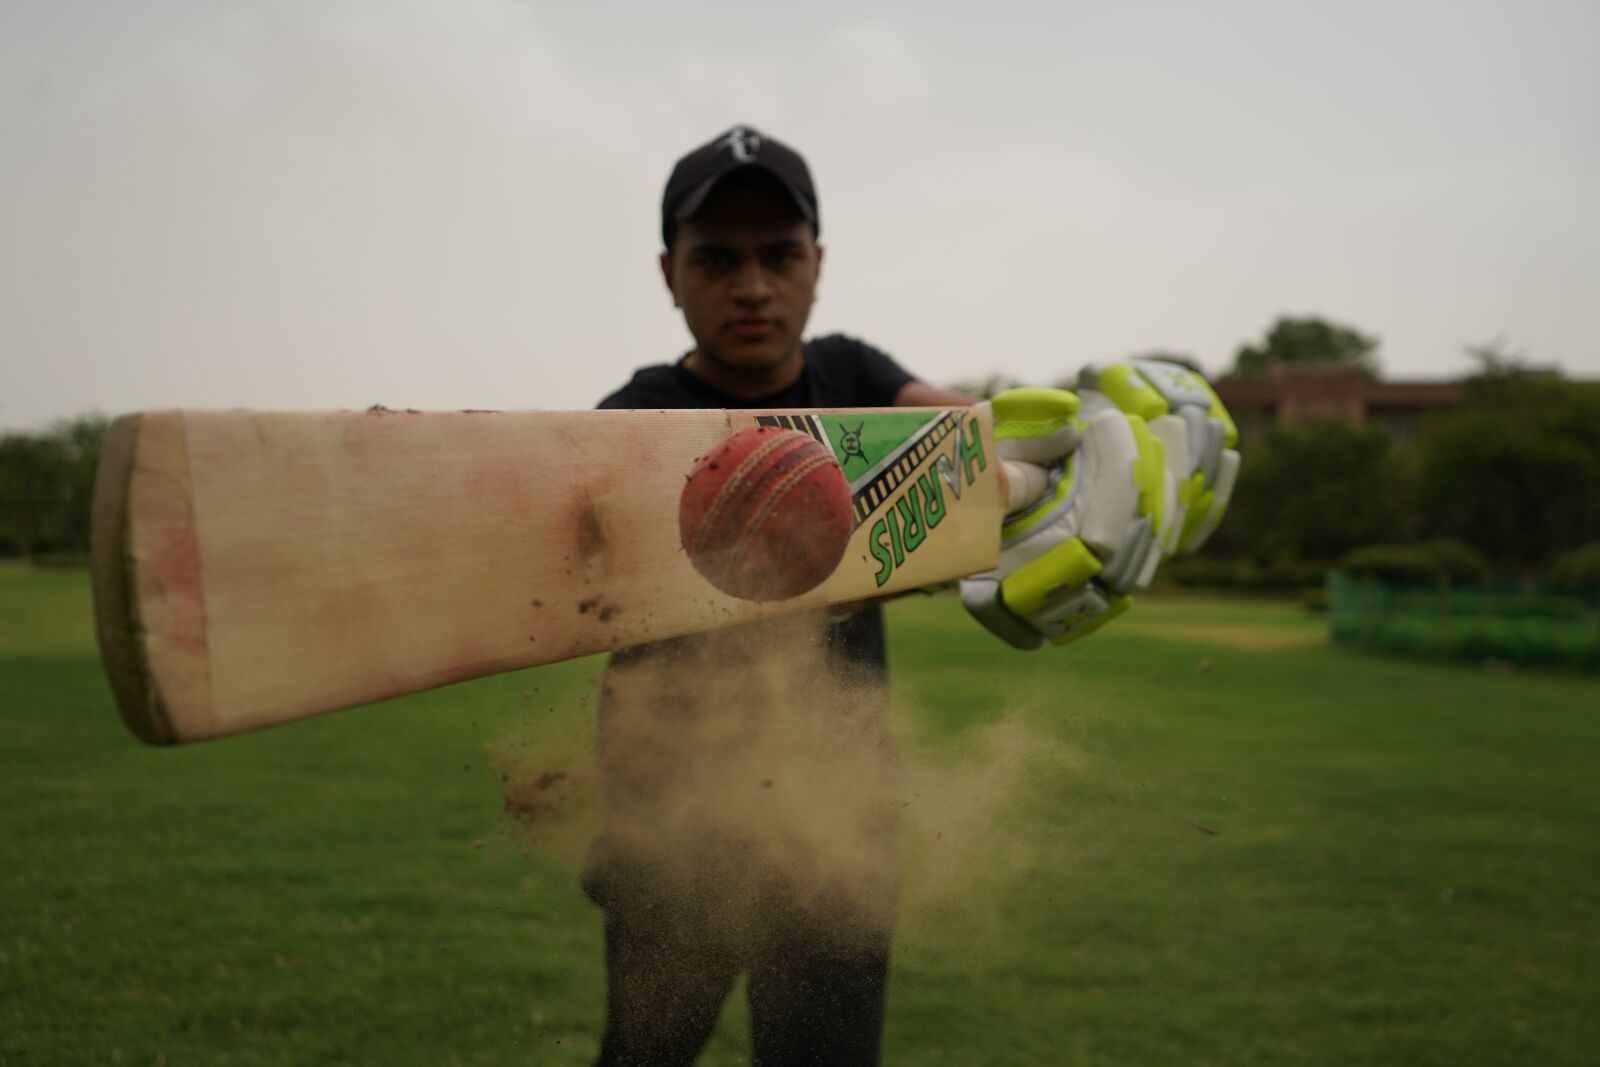 Sony a7 III sample photo. Cricket, sports, player photography